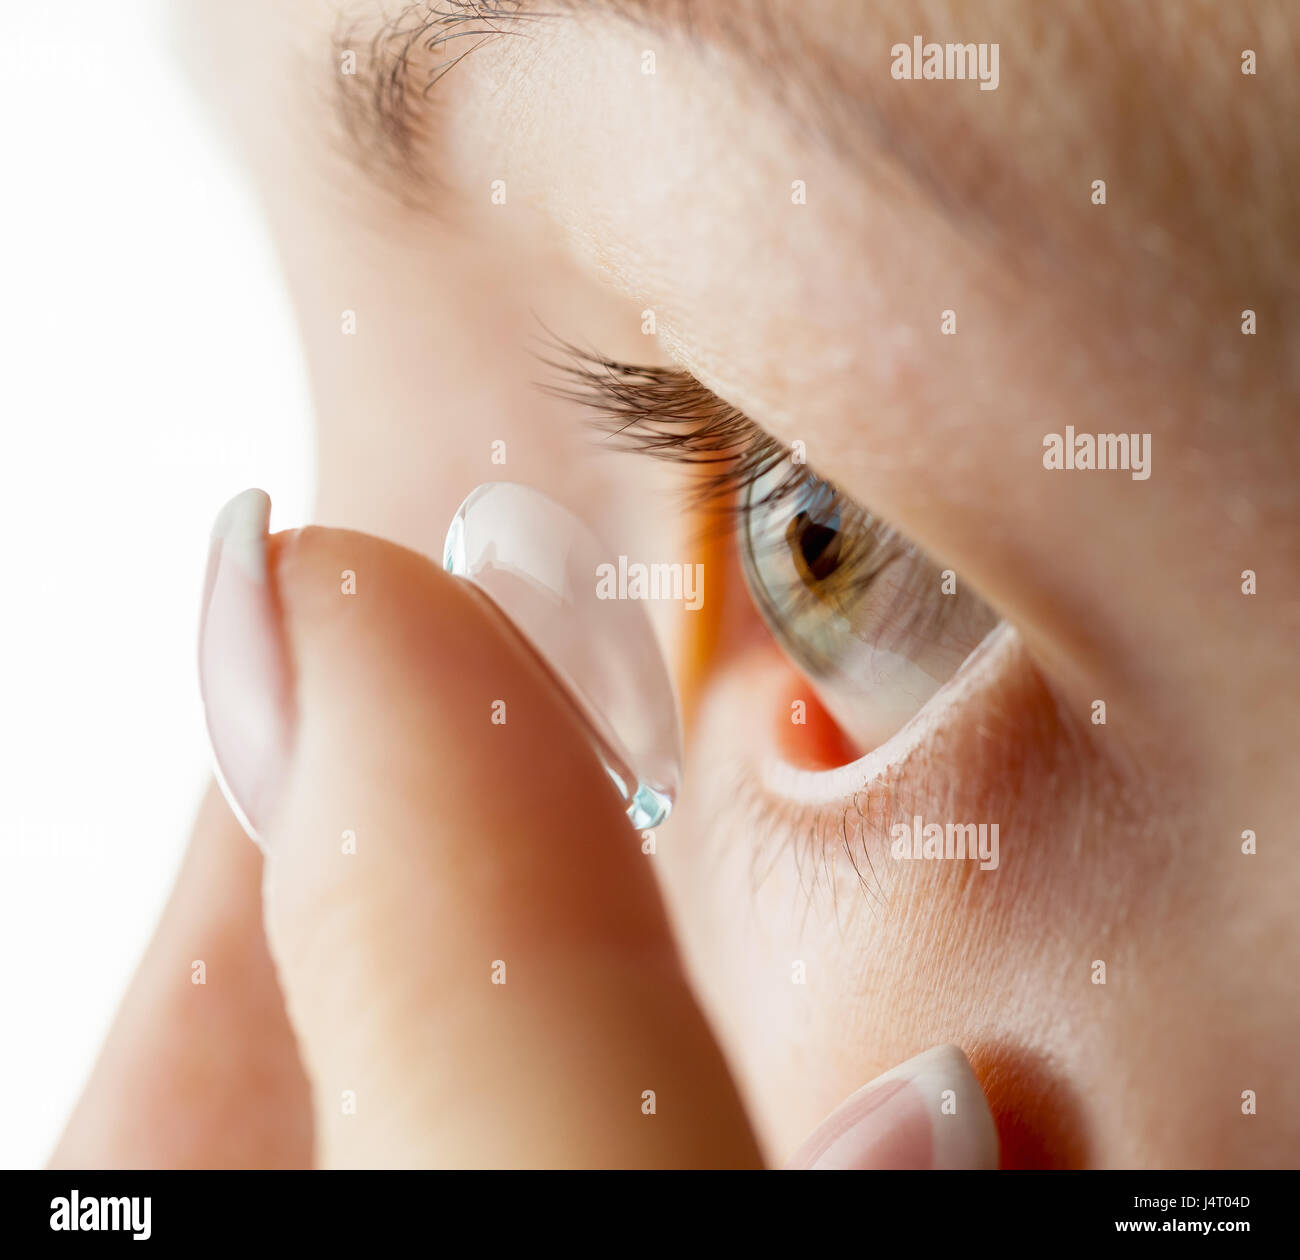 Woman inserts contact lenses. Focus on eyes Stock Photo